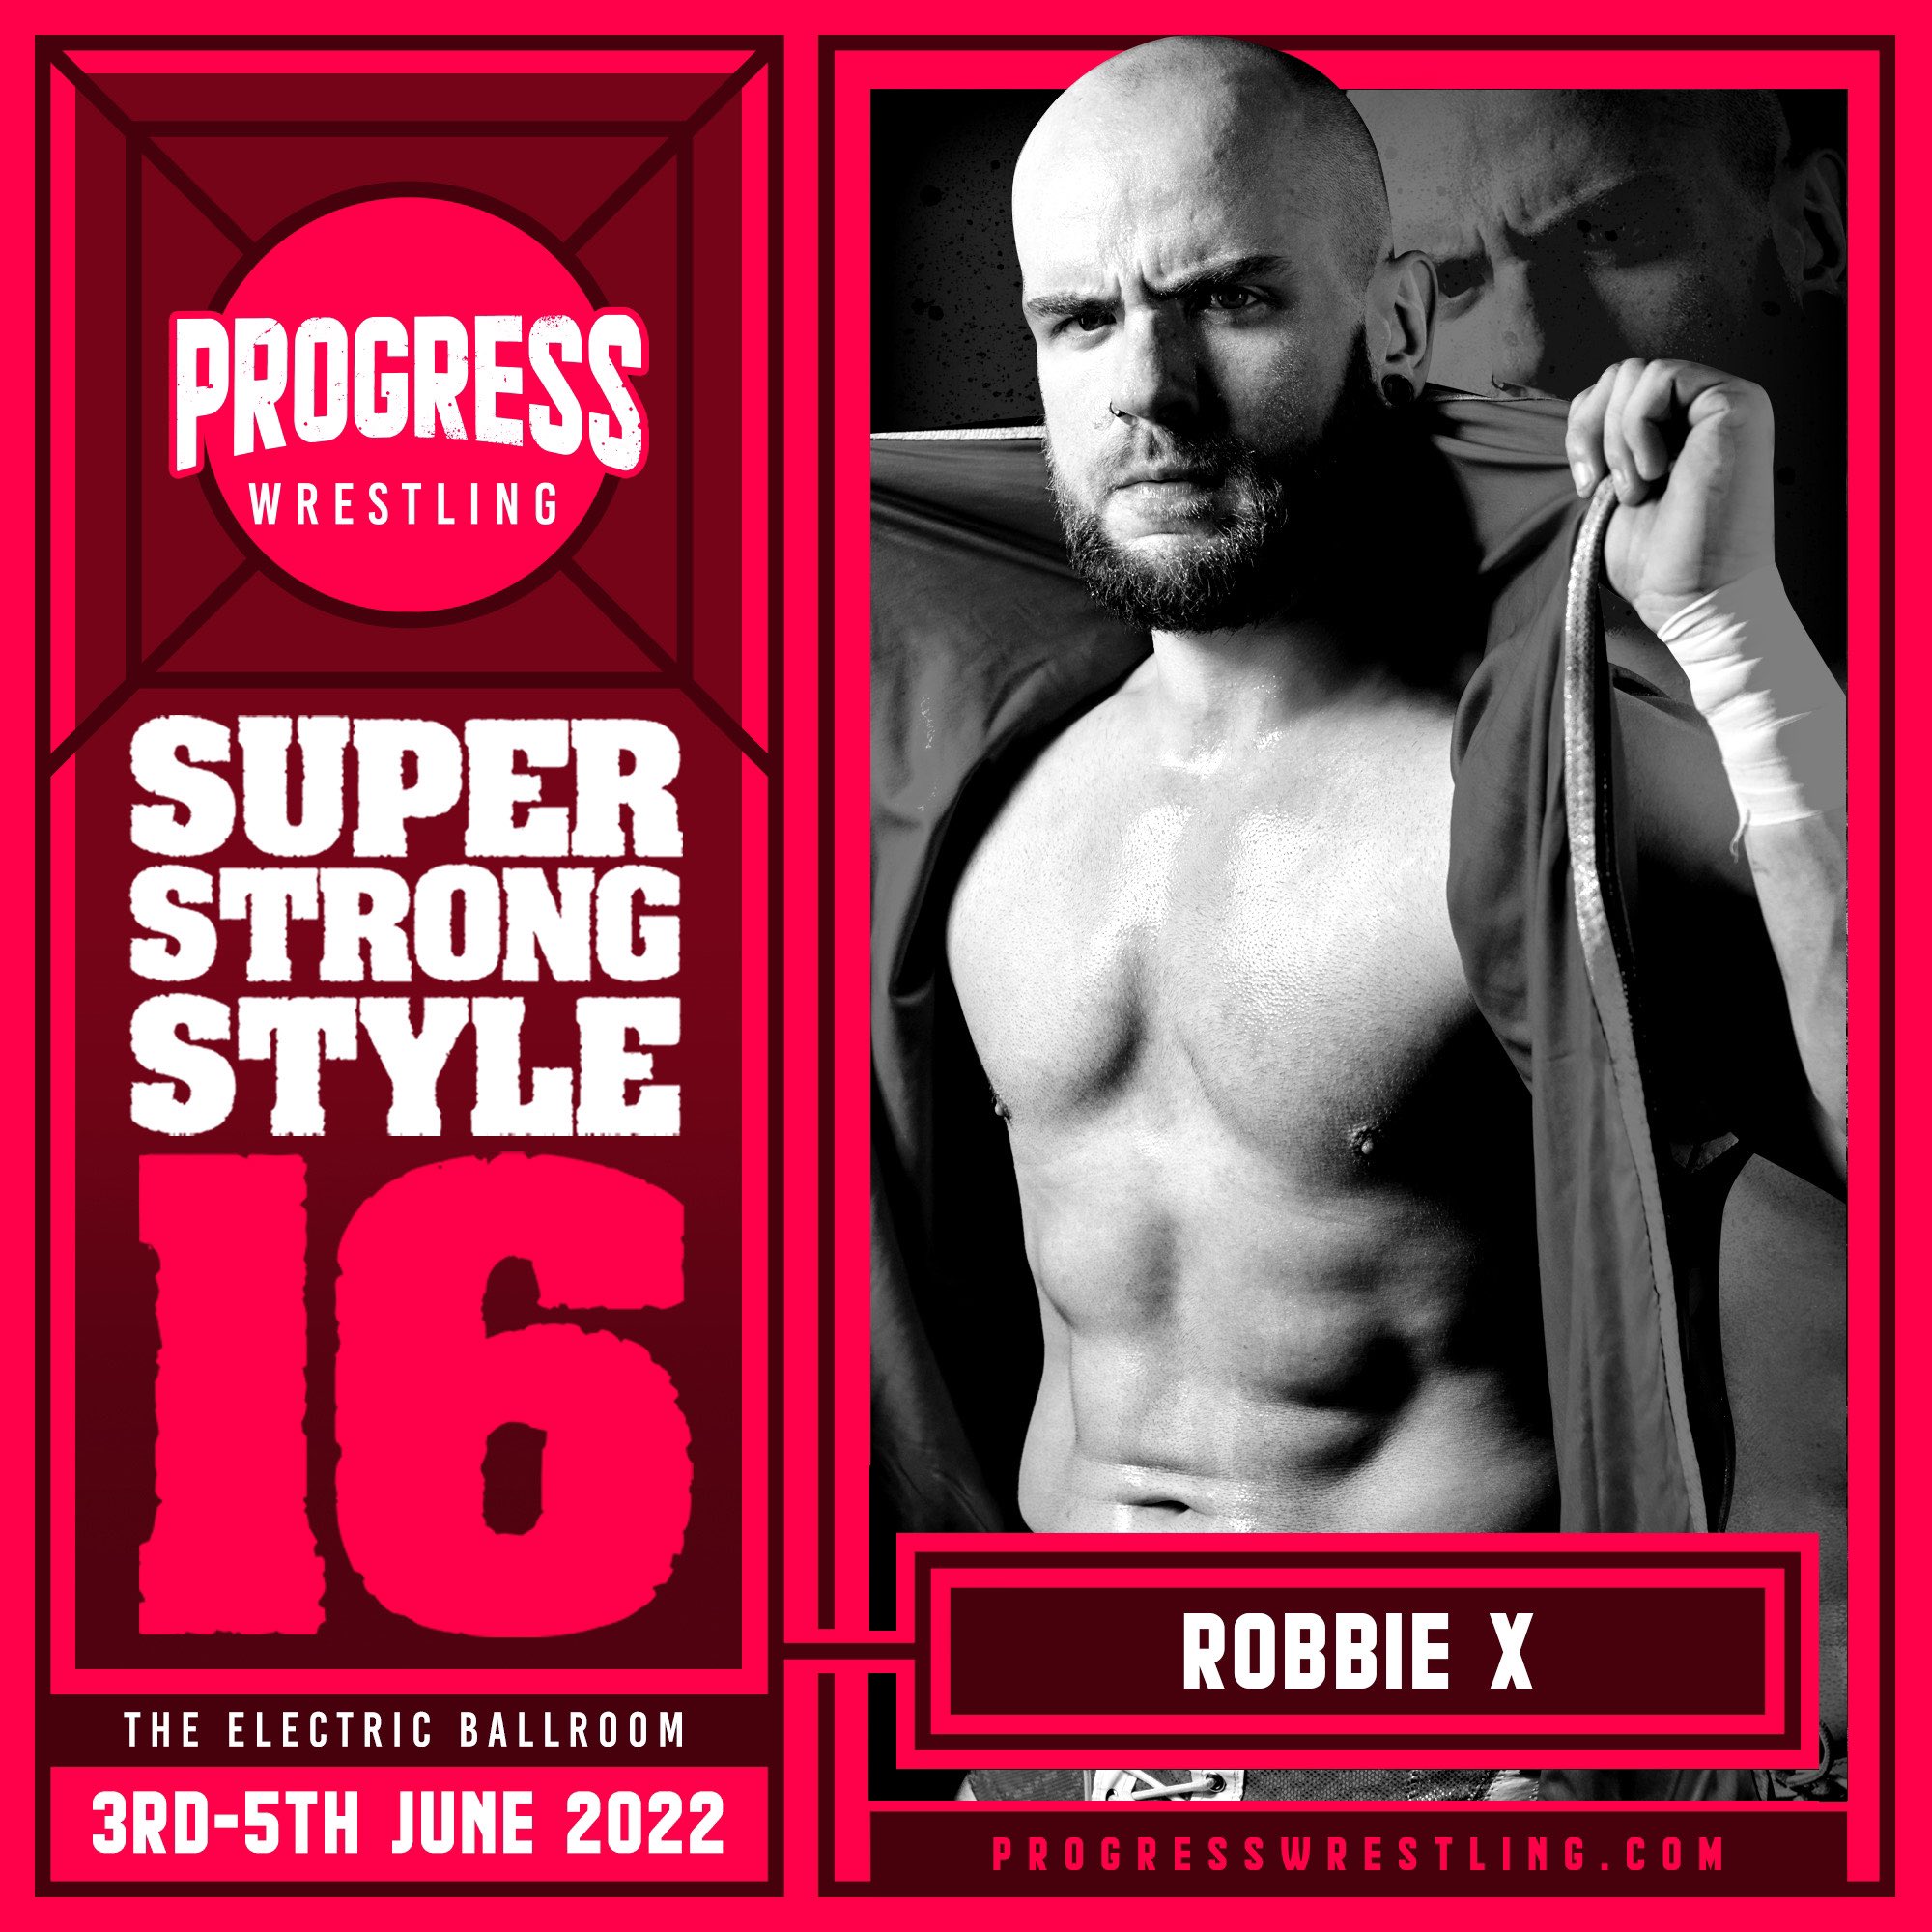 Robbie X Super Strong Style 16